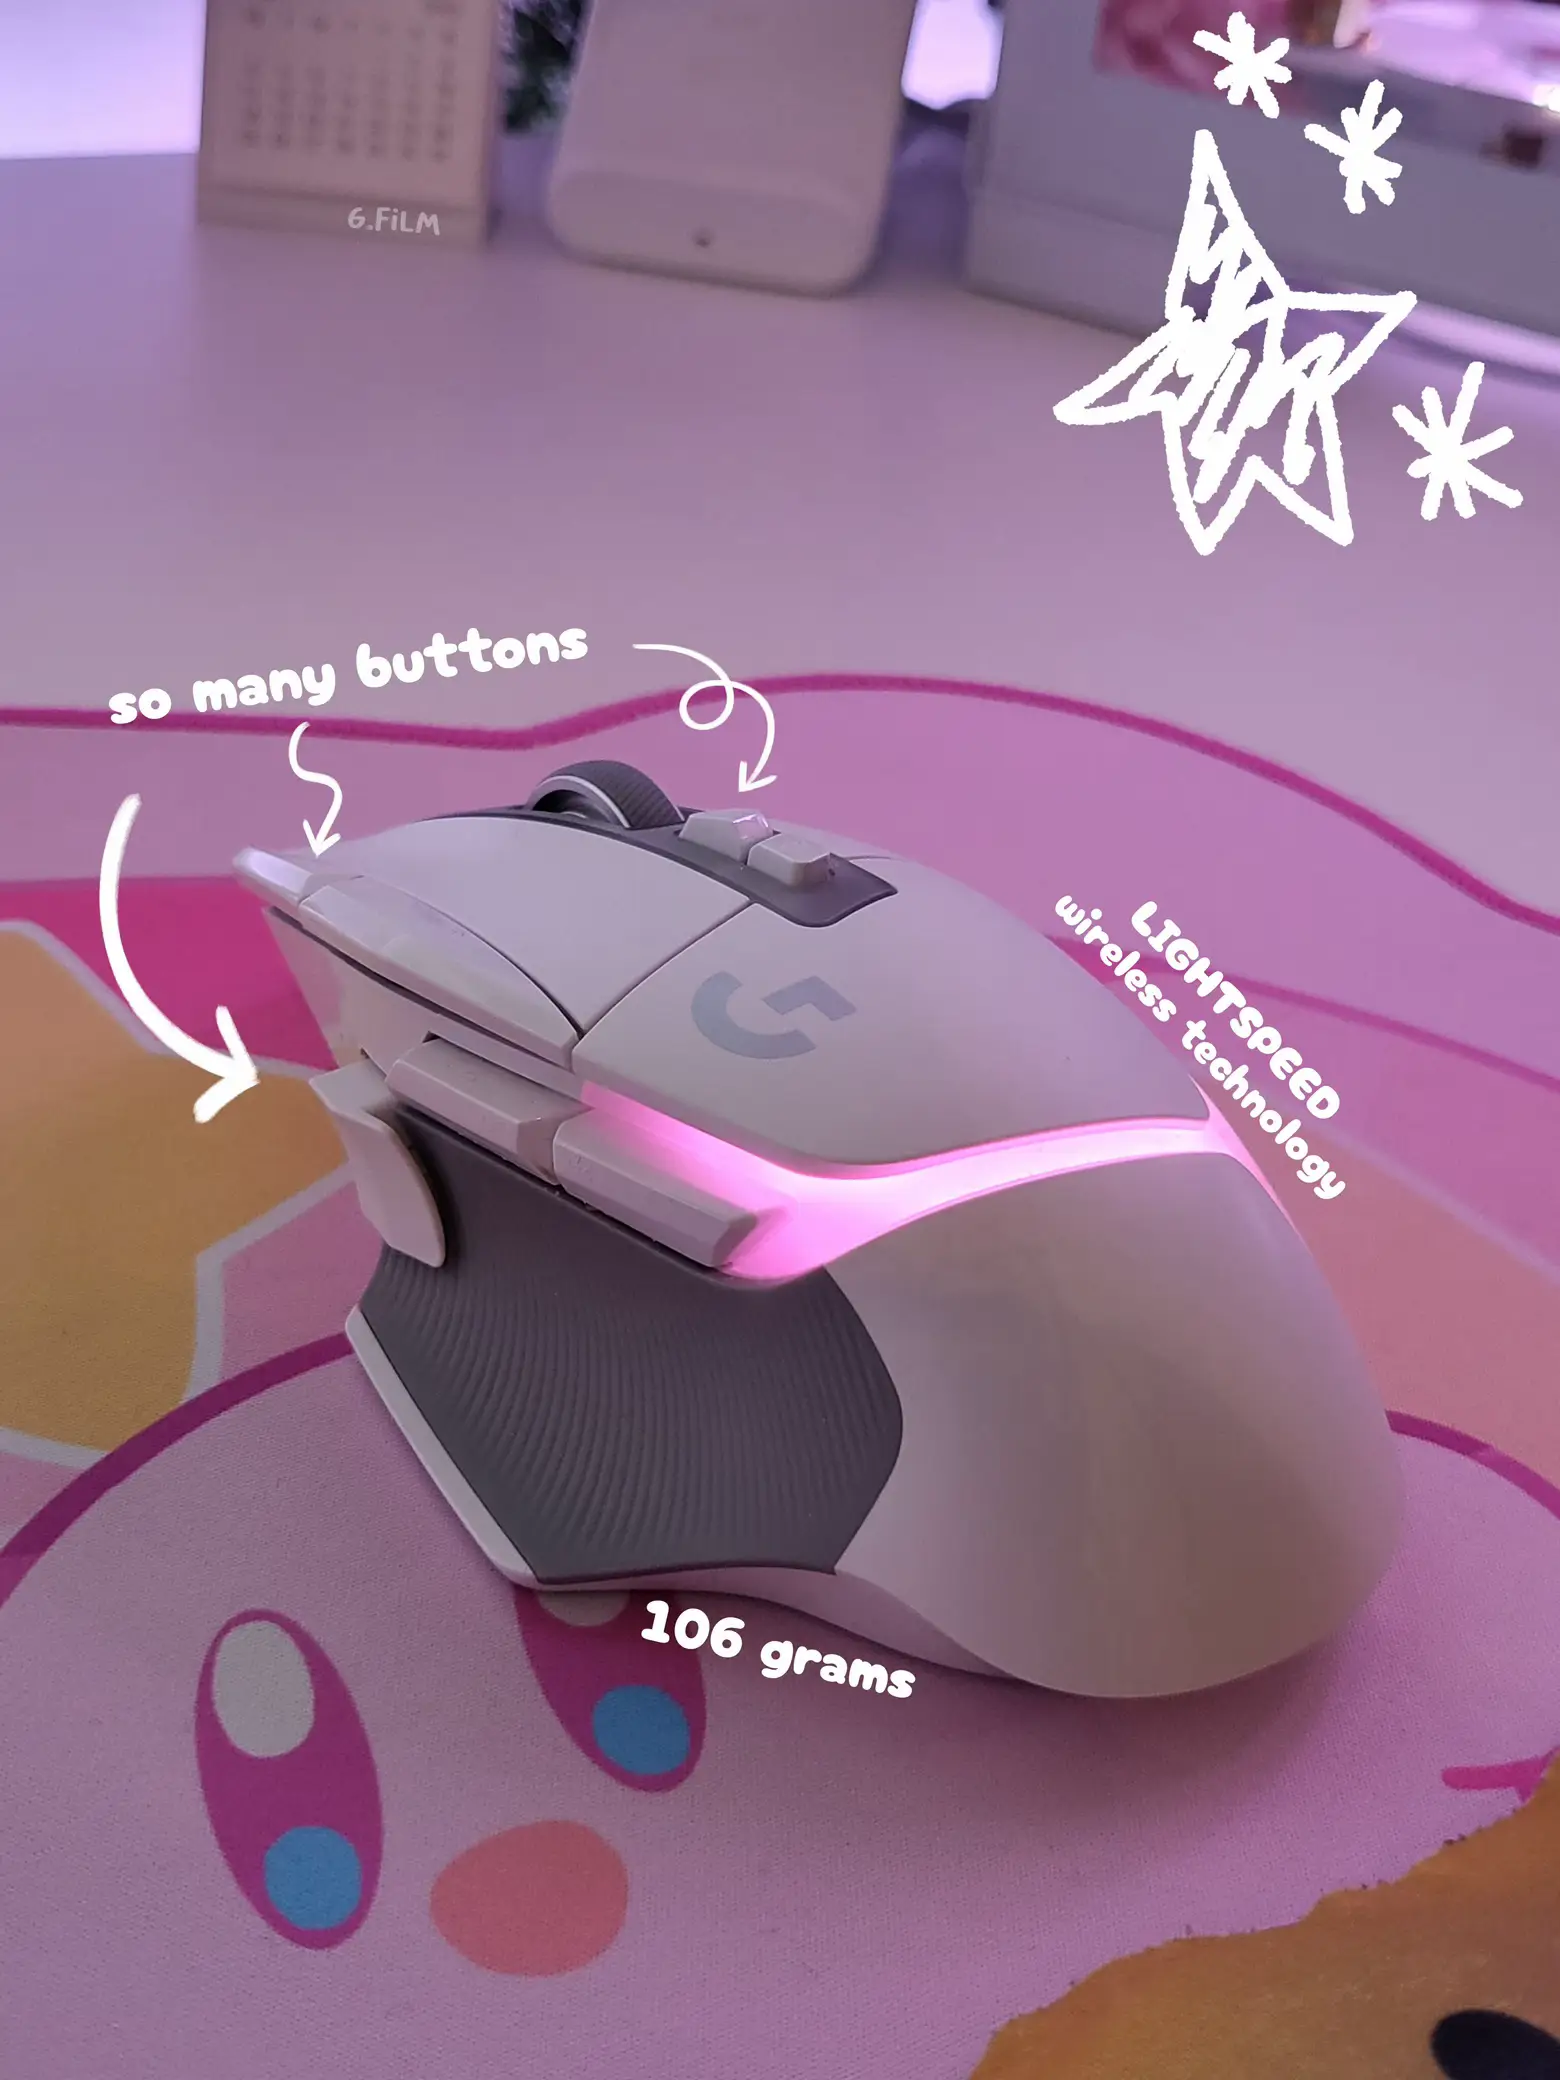 Gaming mouse for Fortnite - Lemon8 Search